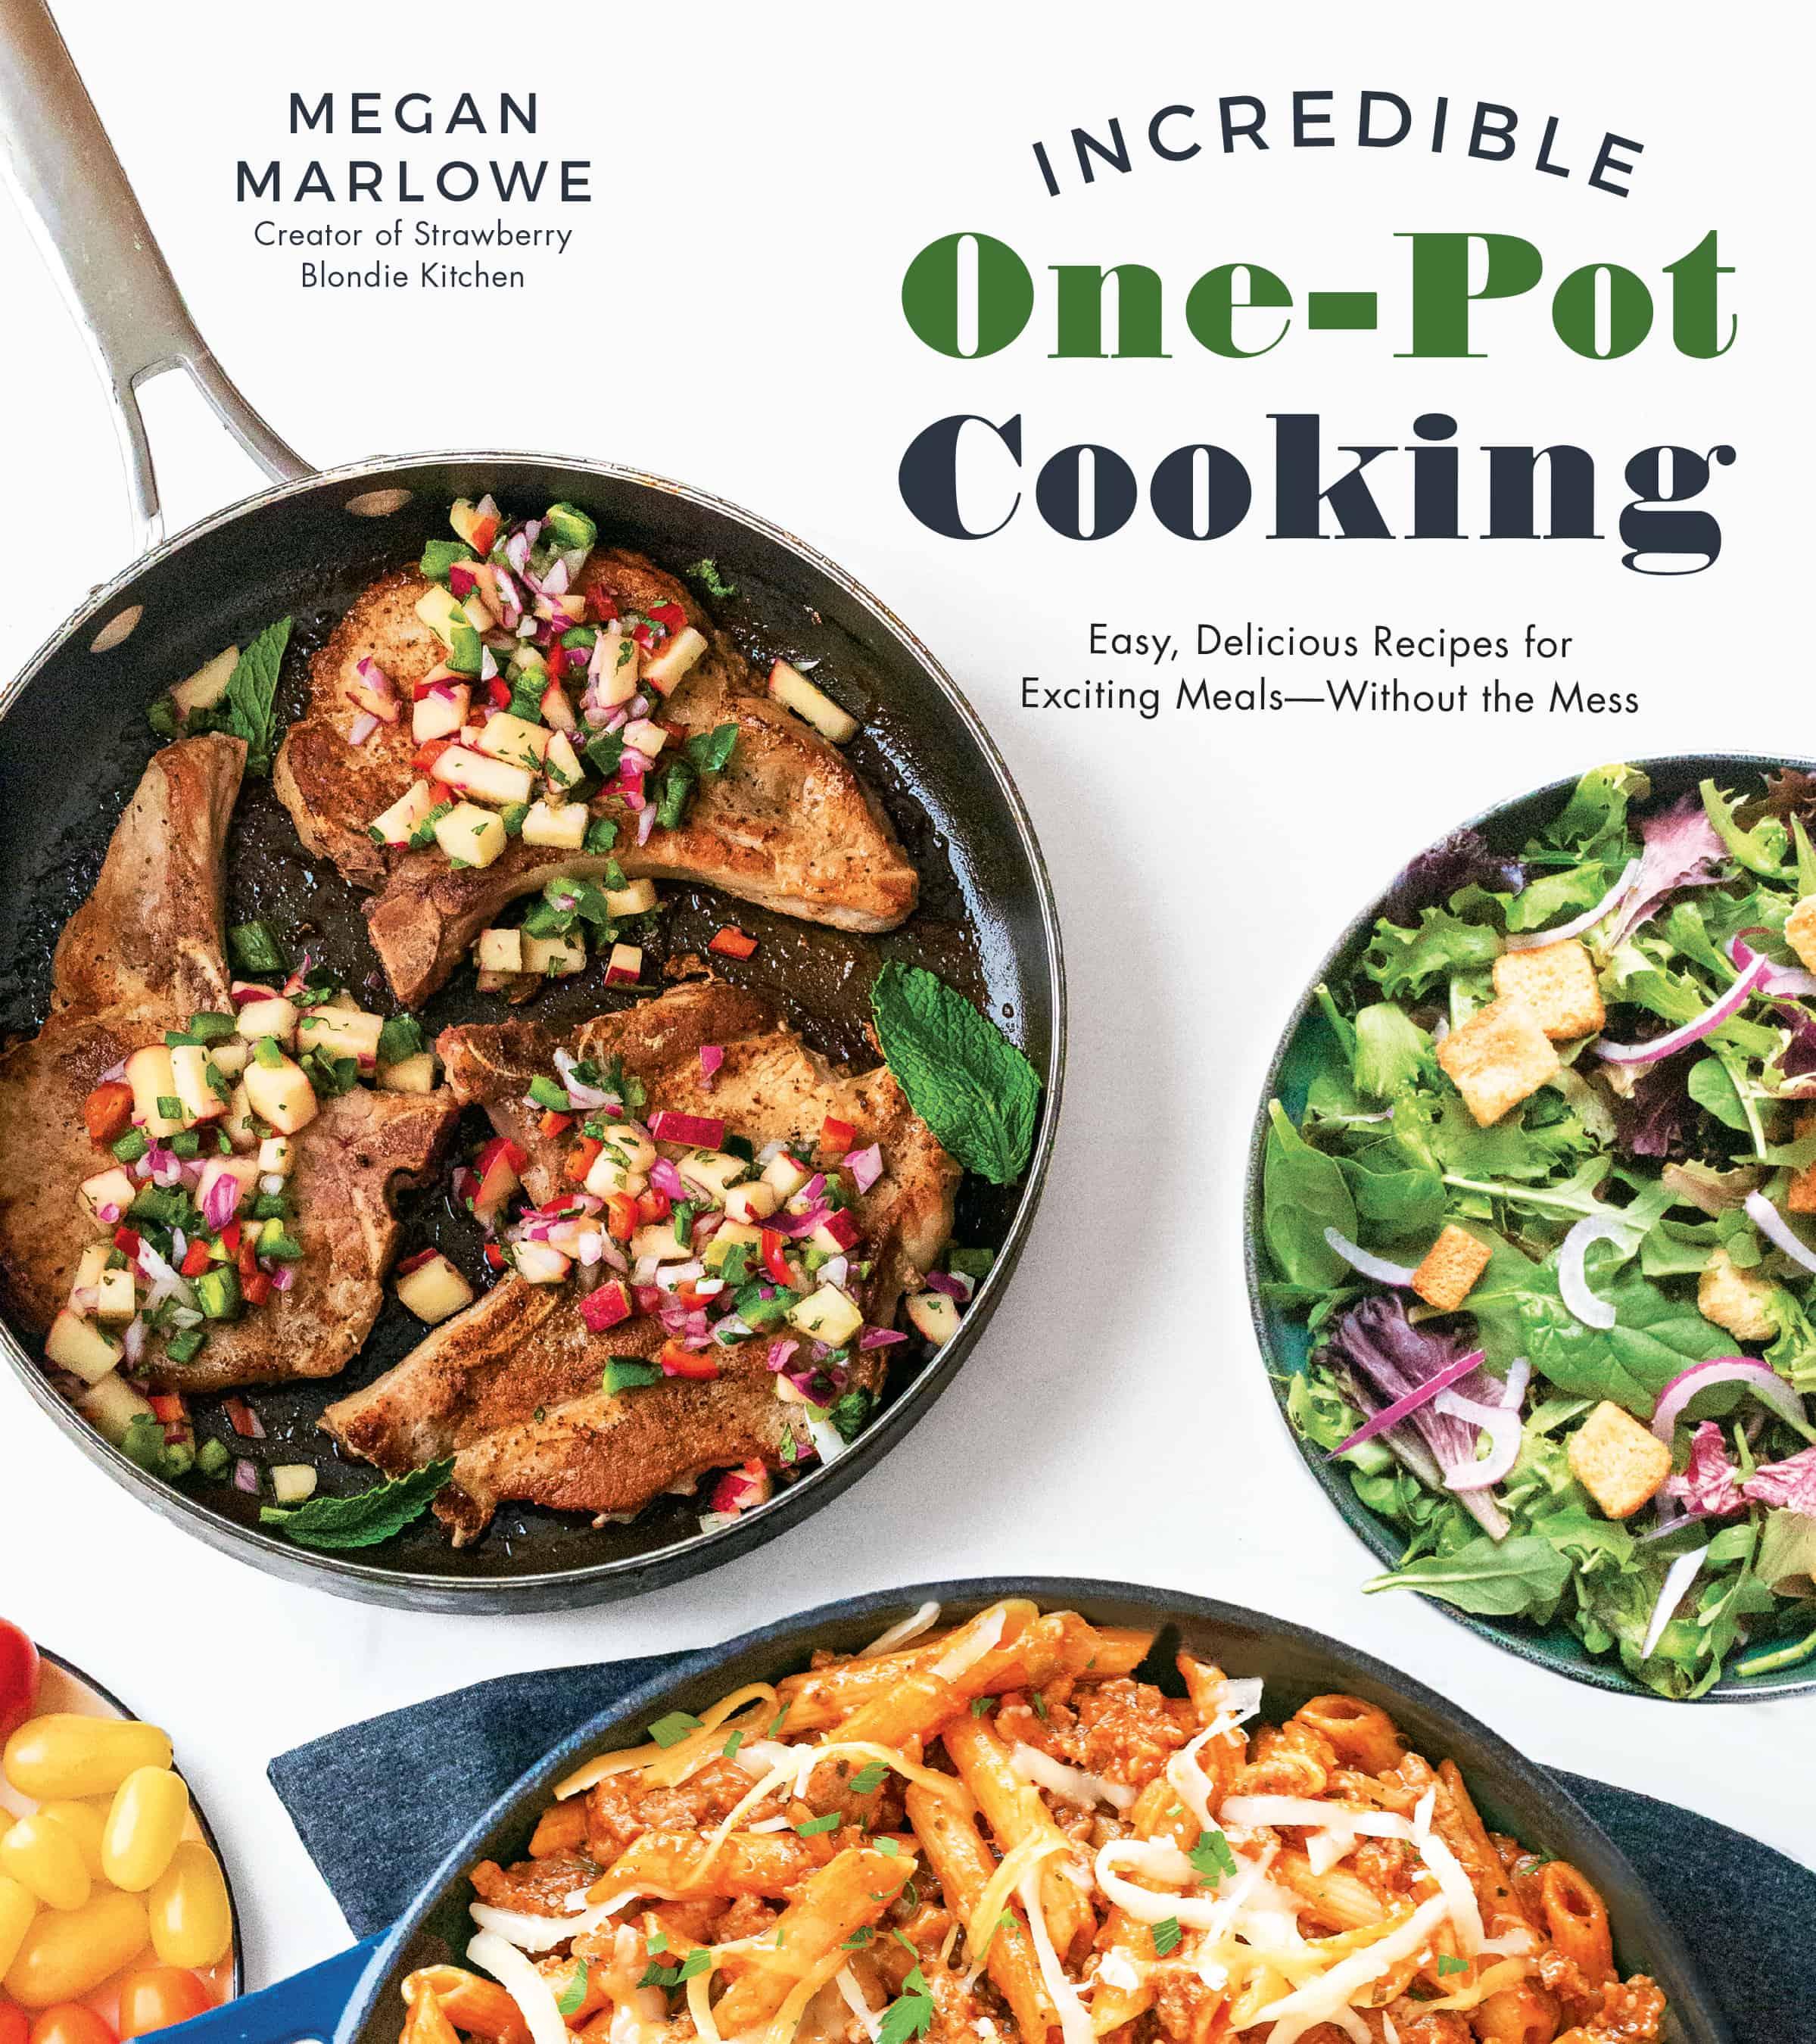 Front cover of Incredible One-Pot Cooking